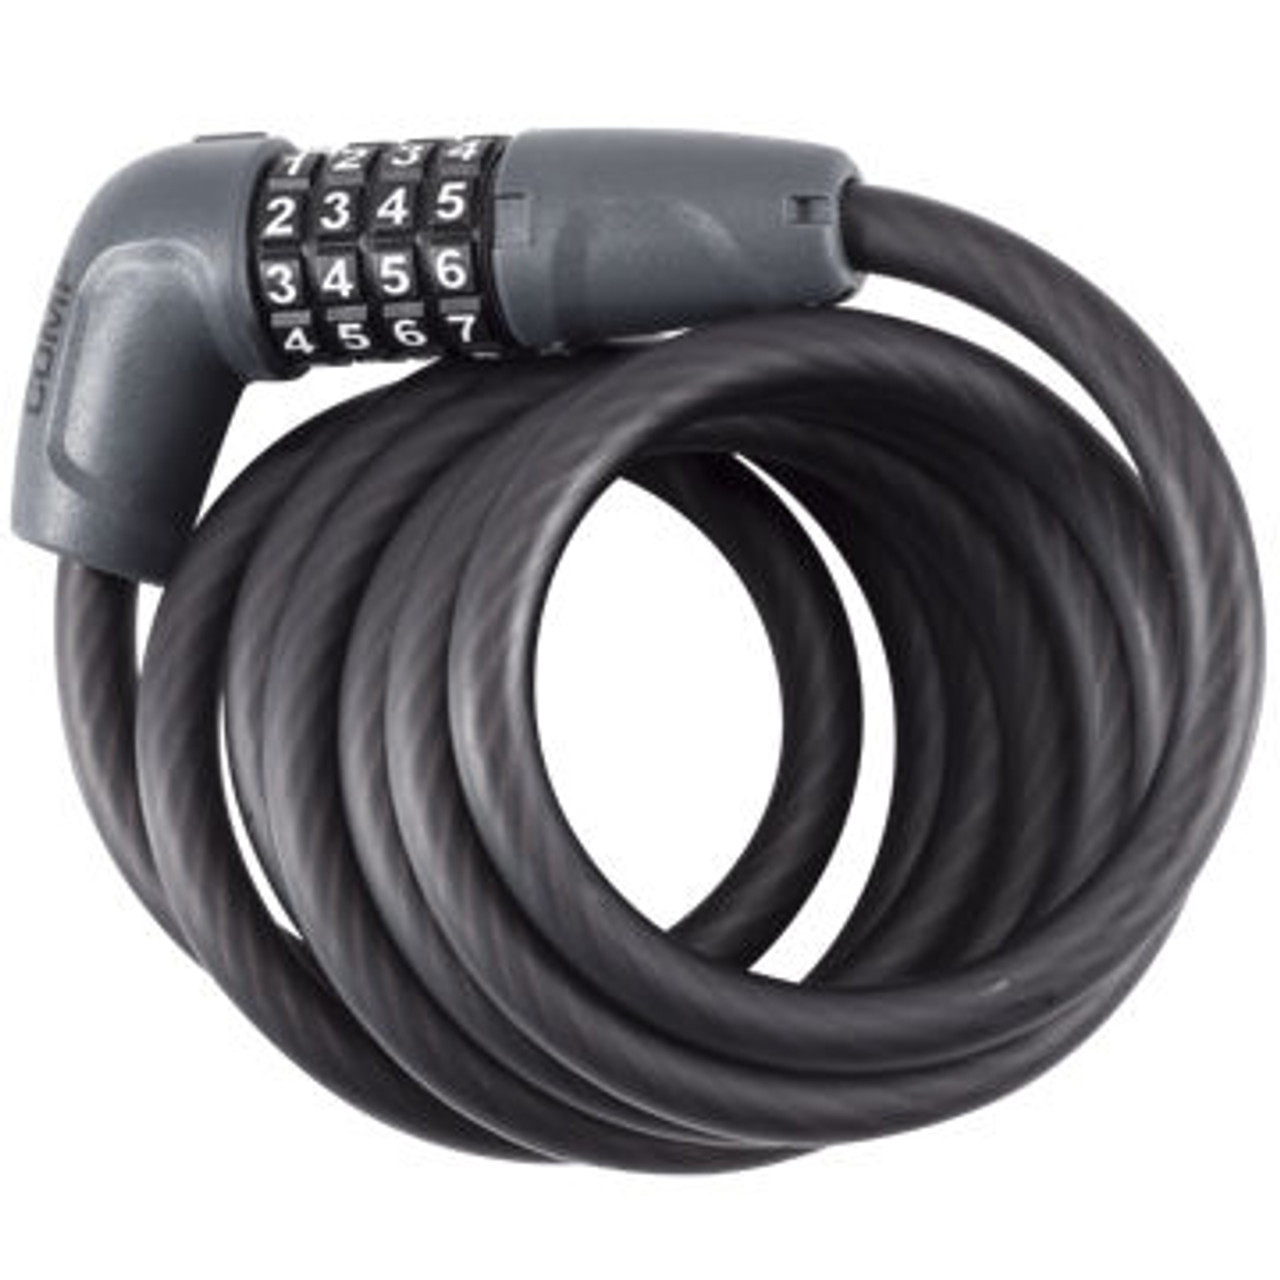 cable combination lock